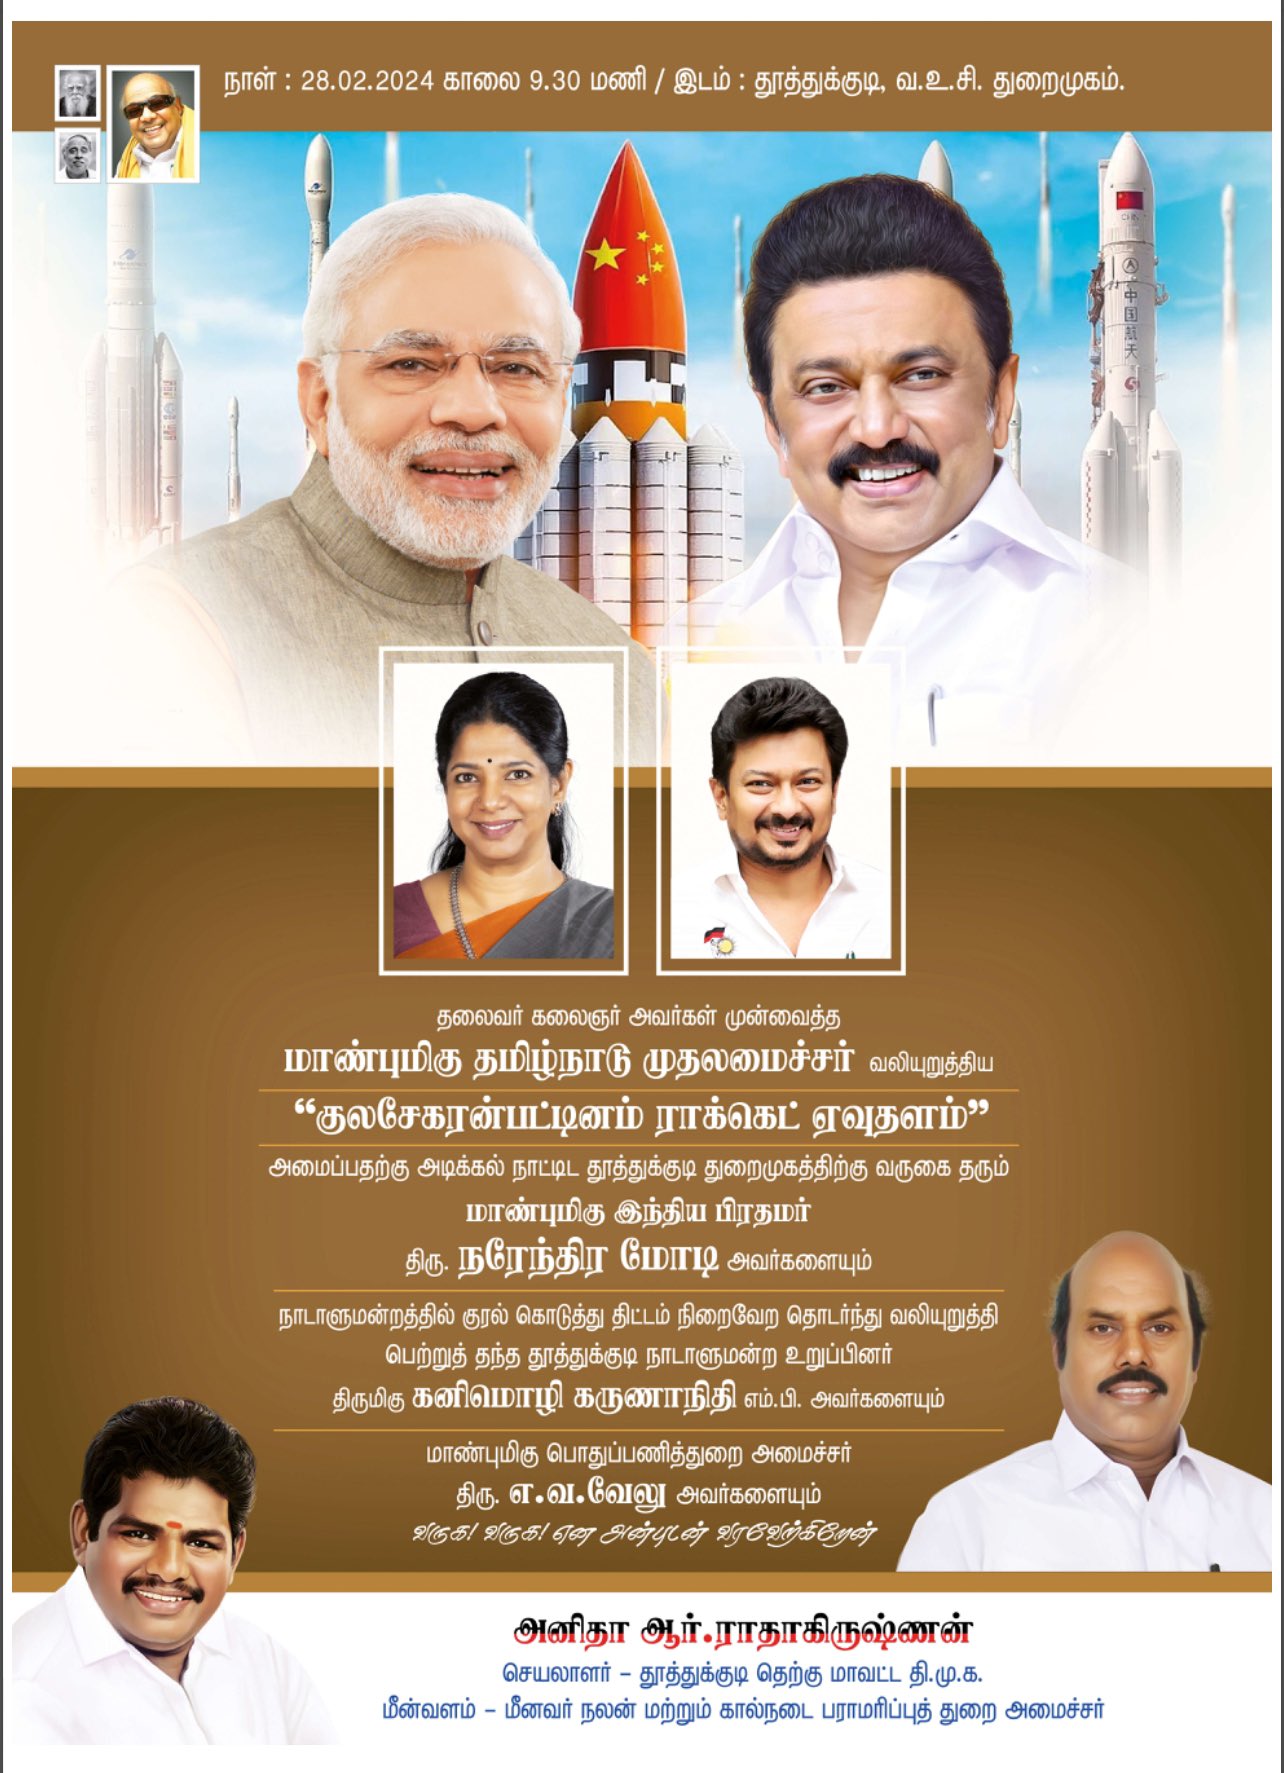 Chinese flag on Tamil Nadu's Isro ad, BJP calls out 'disregard for sovereignty' - India Today